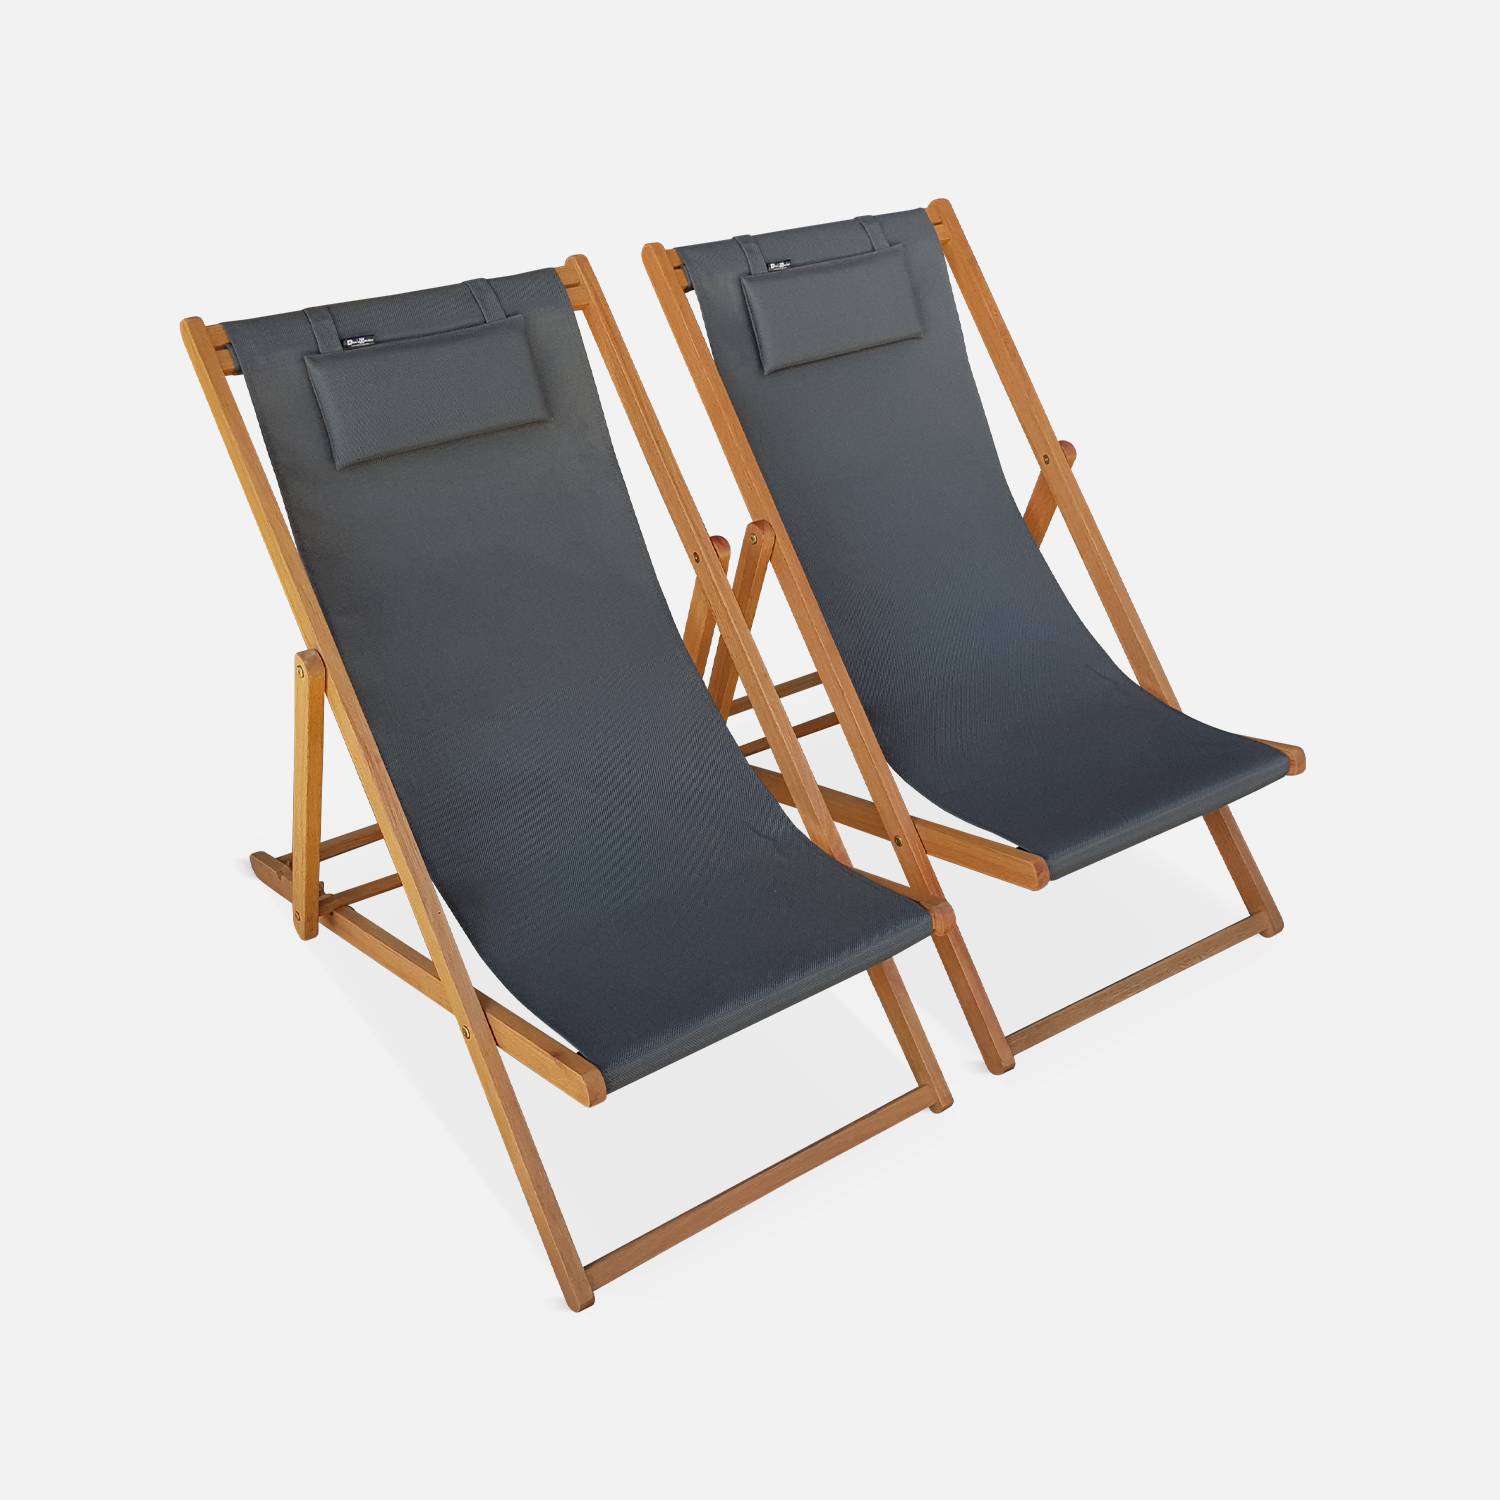 Pair of pre-oiled FSC eucalyptus deck chairs with headrest cushions - Creus - Wood/Anthracite Photo2